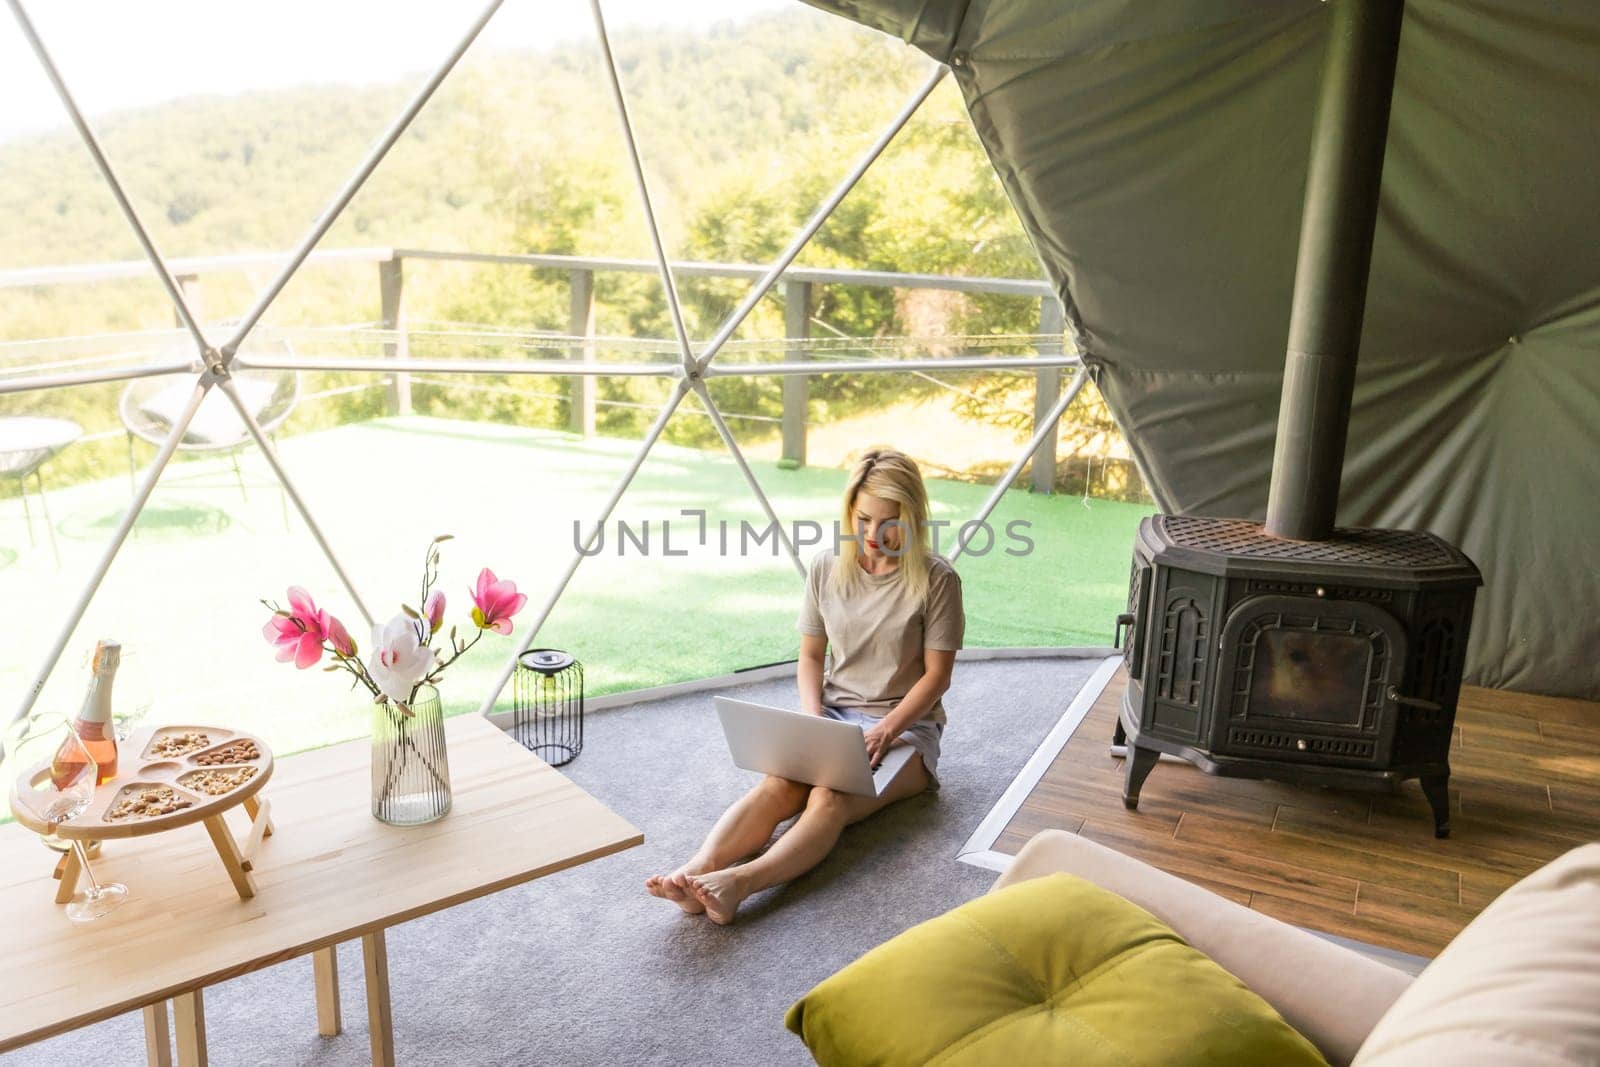 Transparent bubble tent at glamping, Lush forest around and interior. Woman with laptop.